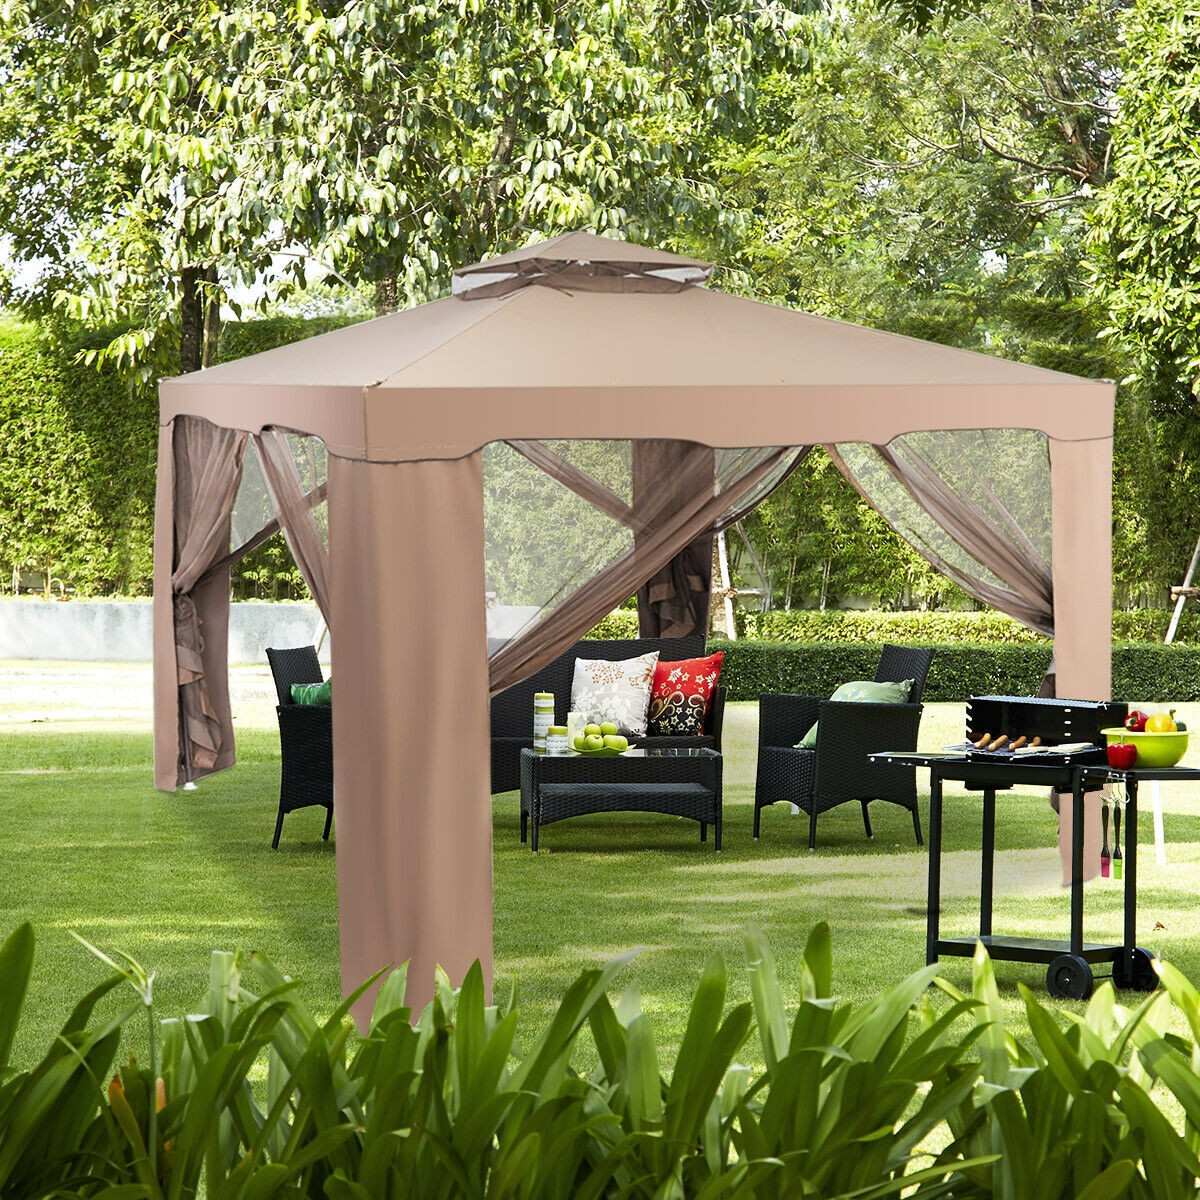 10 Ft. x 10 Ft. Canopy Gazebo Tent Shelter With Mosquito Netting Outdoor Patio